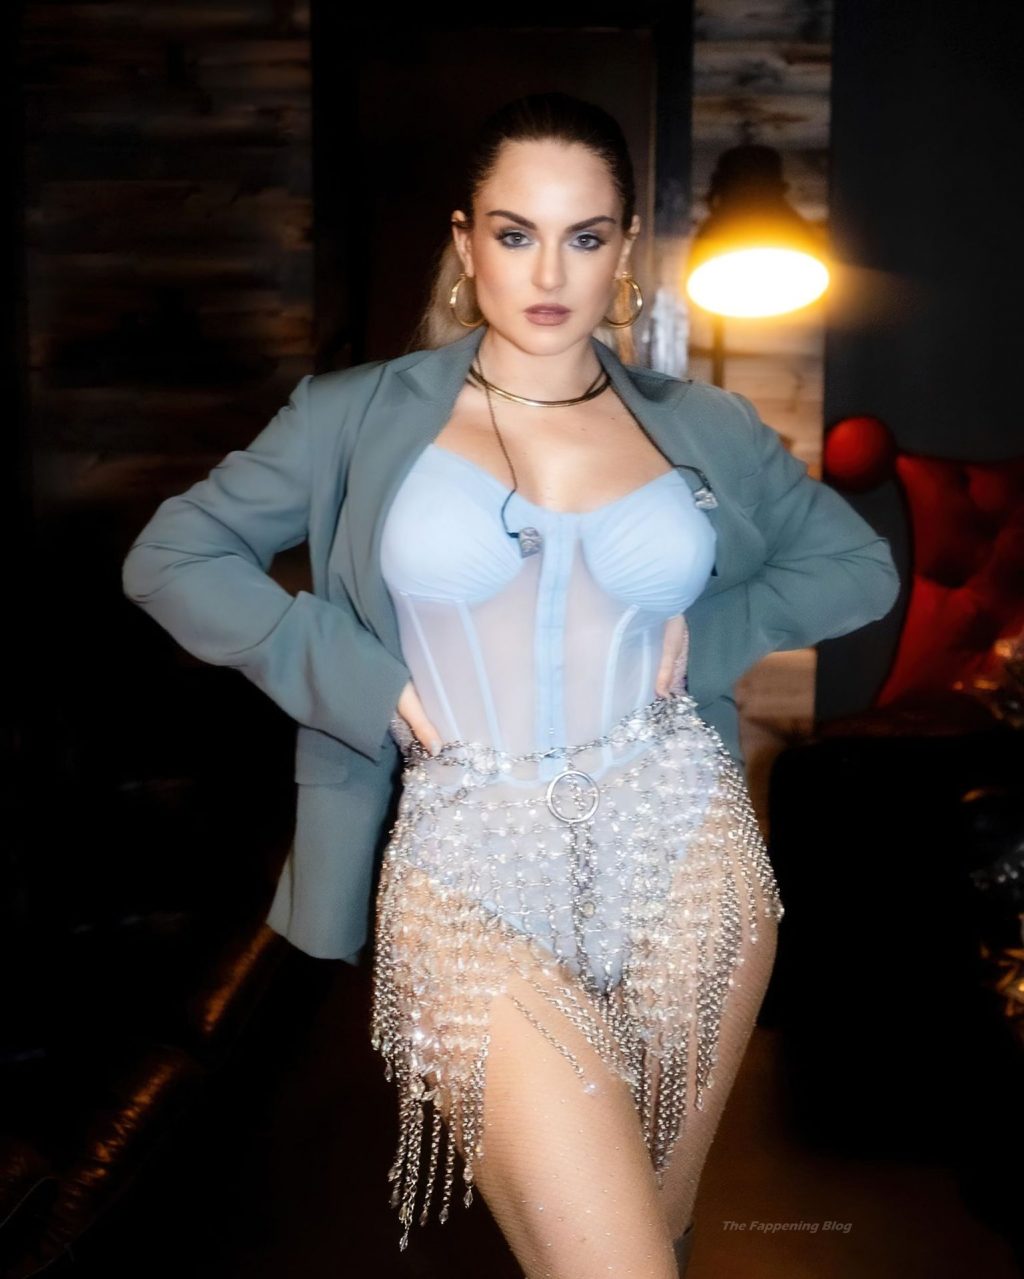 JoJo Shows Off Her Sexy Boobs And Butt (6 Photos)